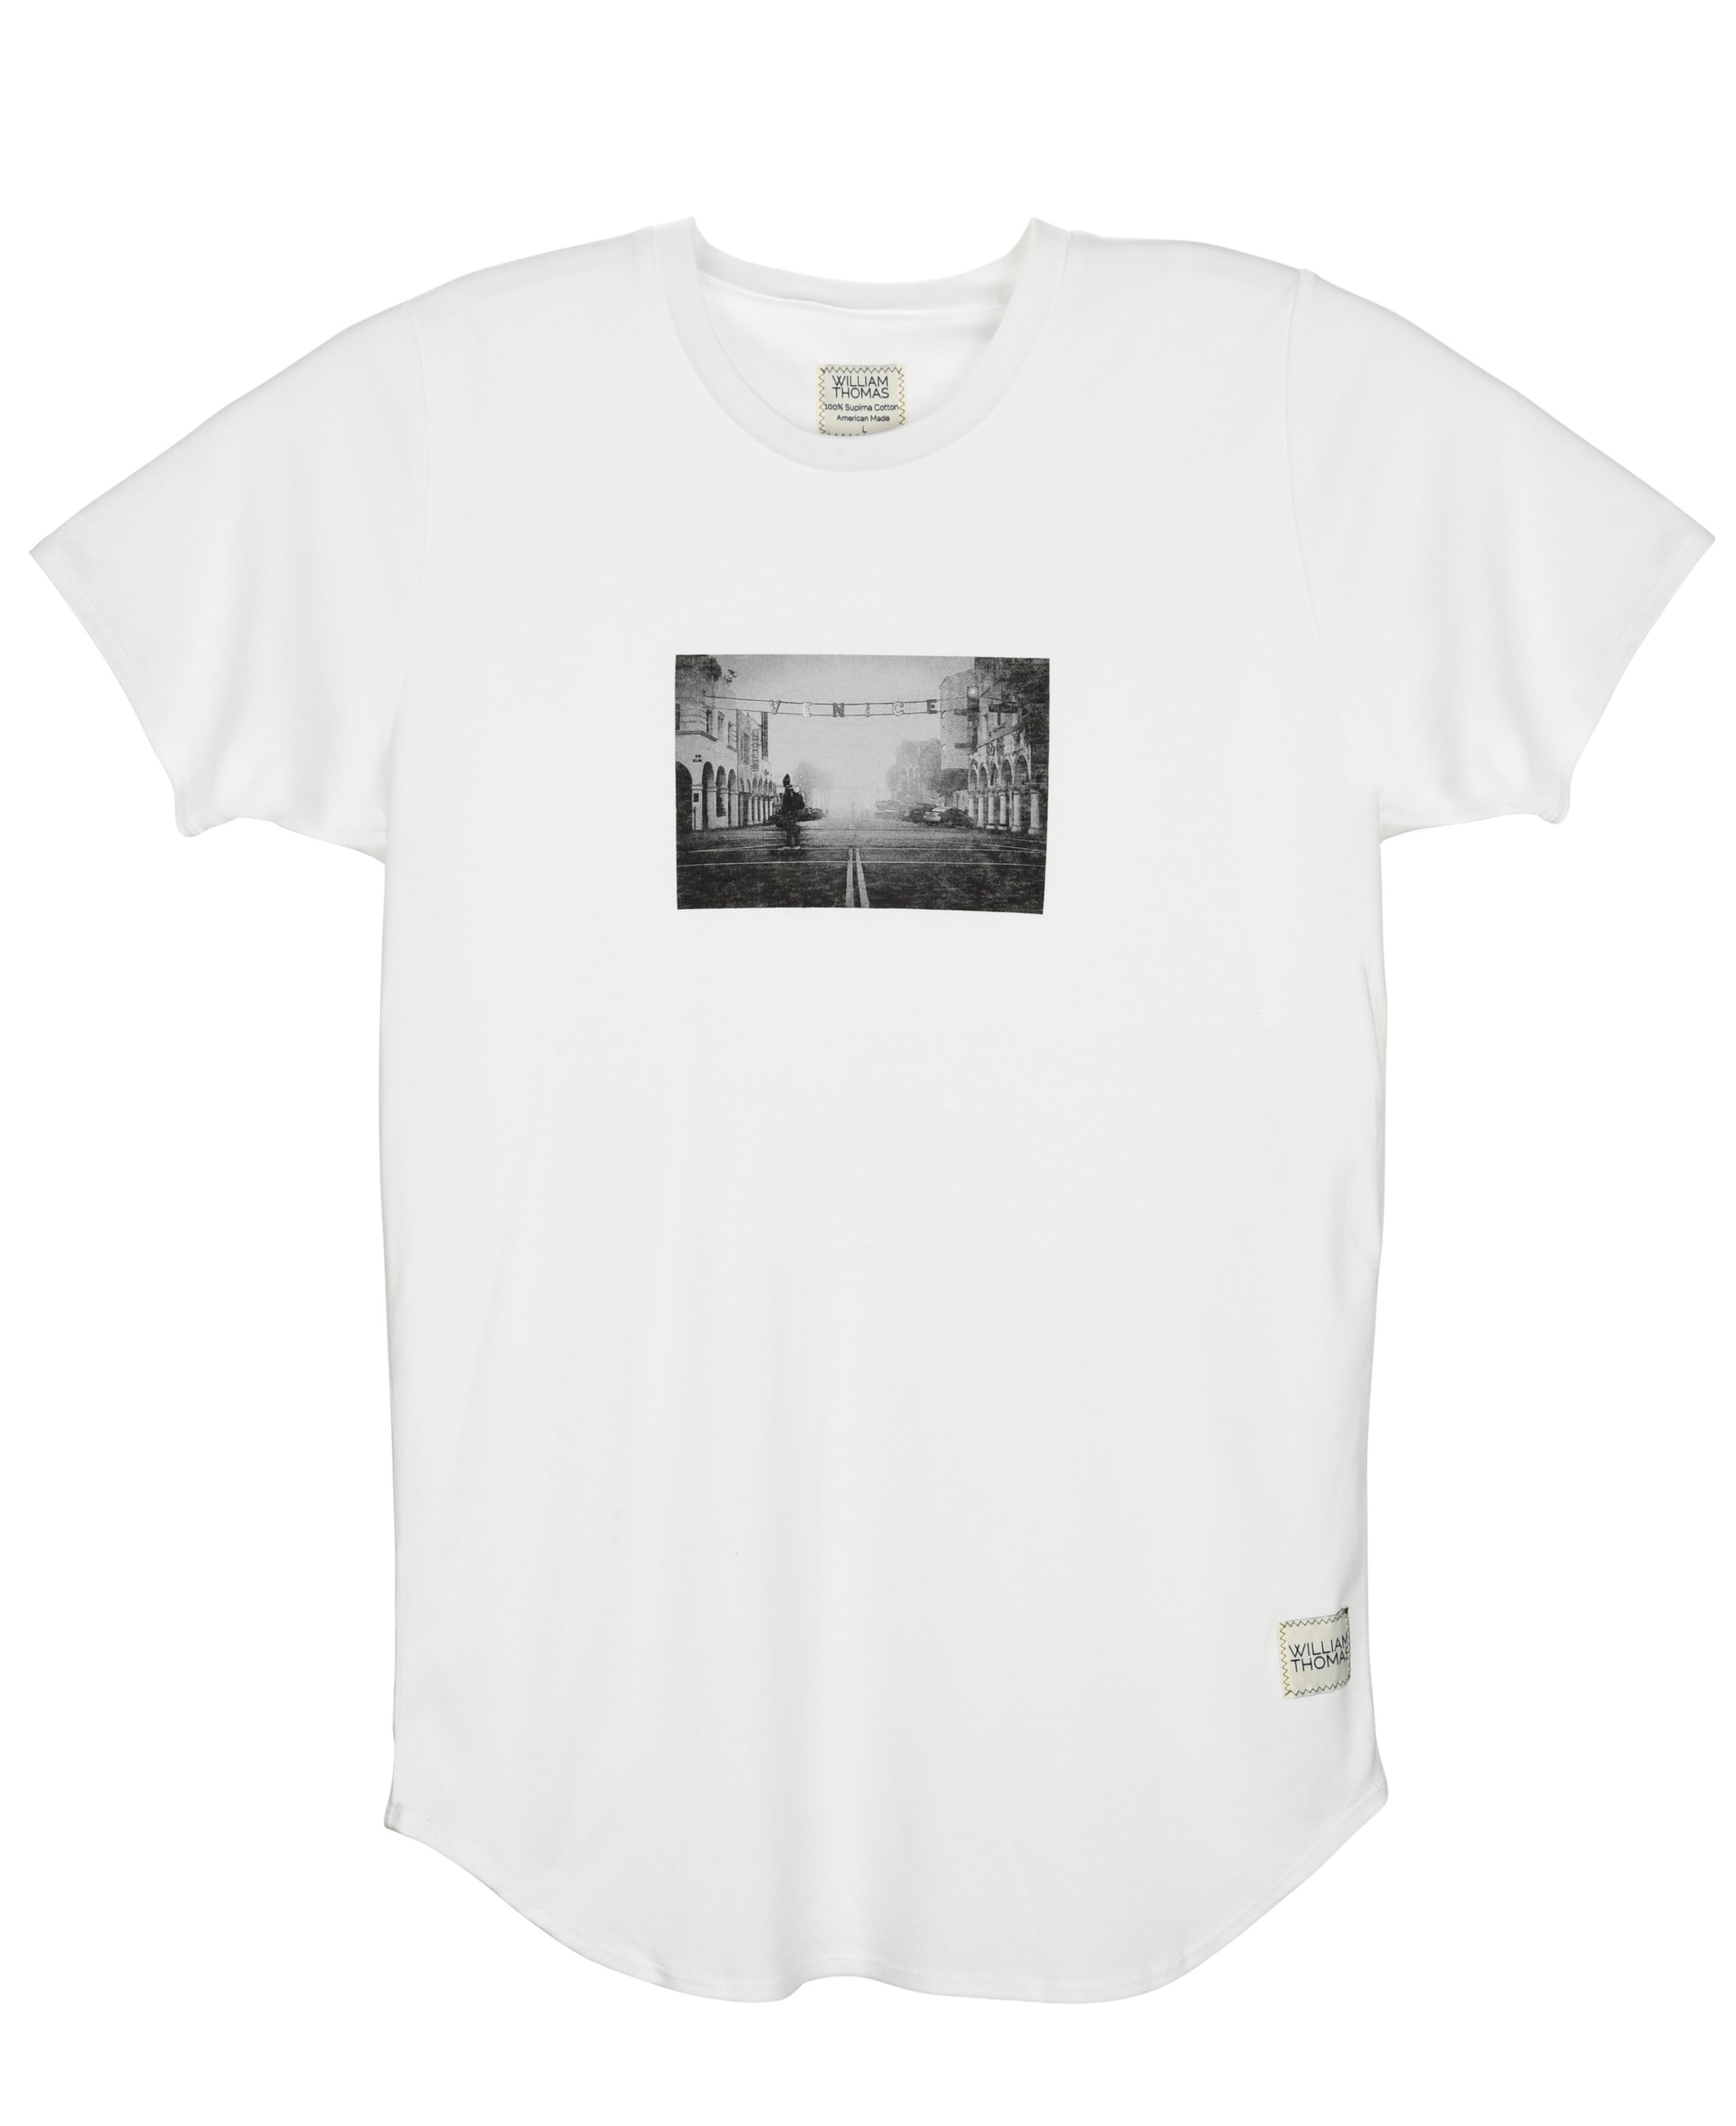 Sold Out) Supima® Venice Beach, City Series Tee, Ghost White (limited – W I  L L I A M T H O M A S